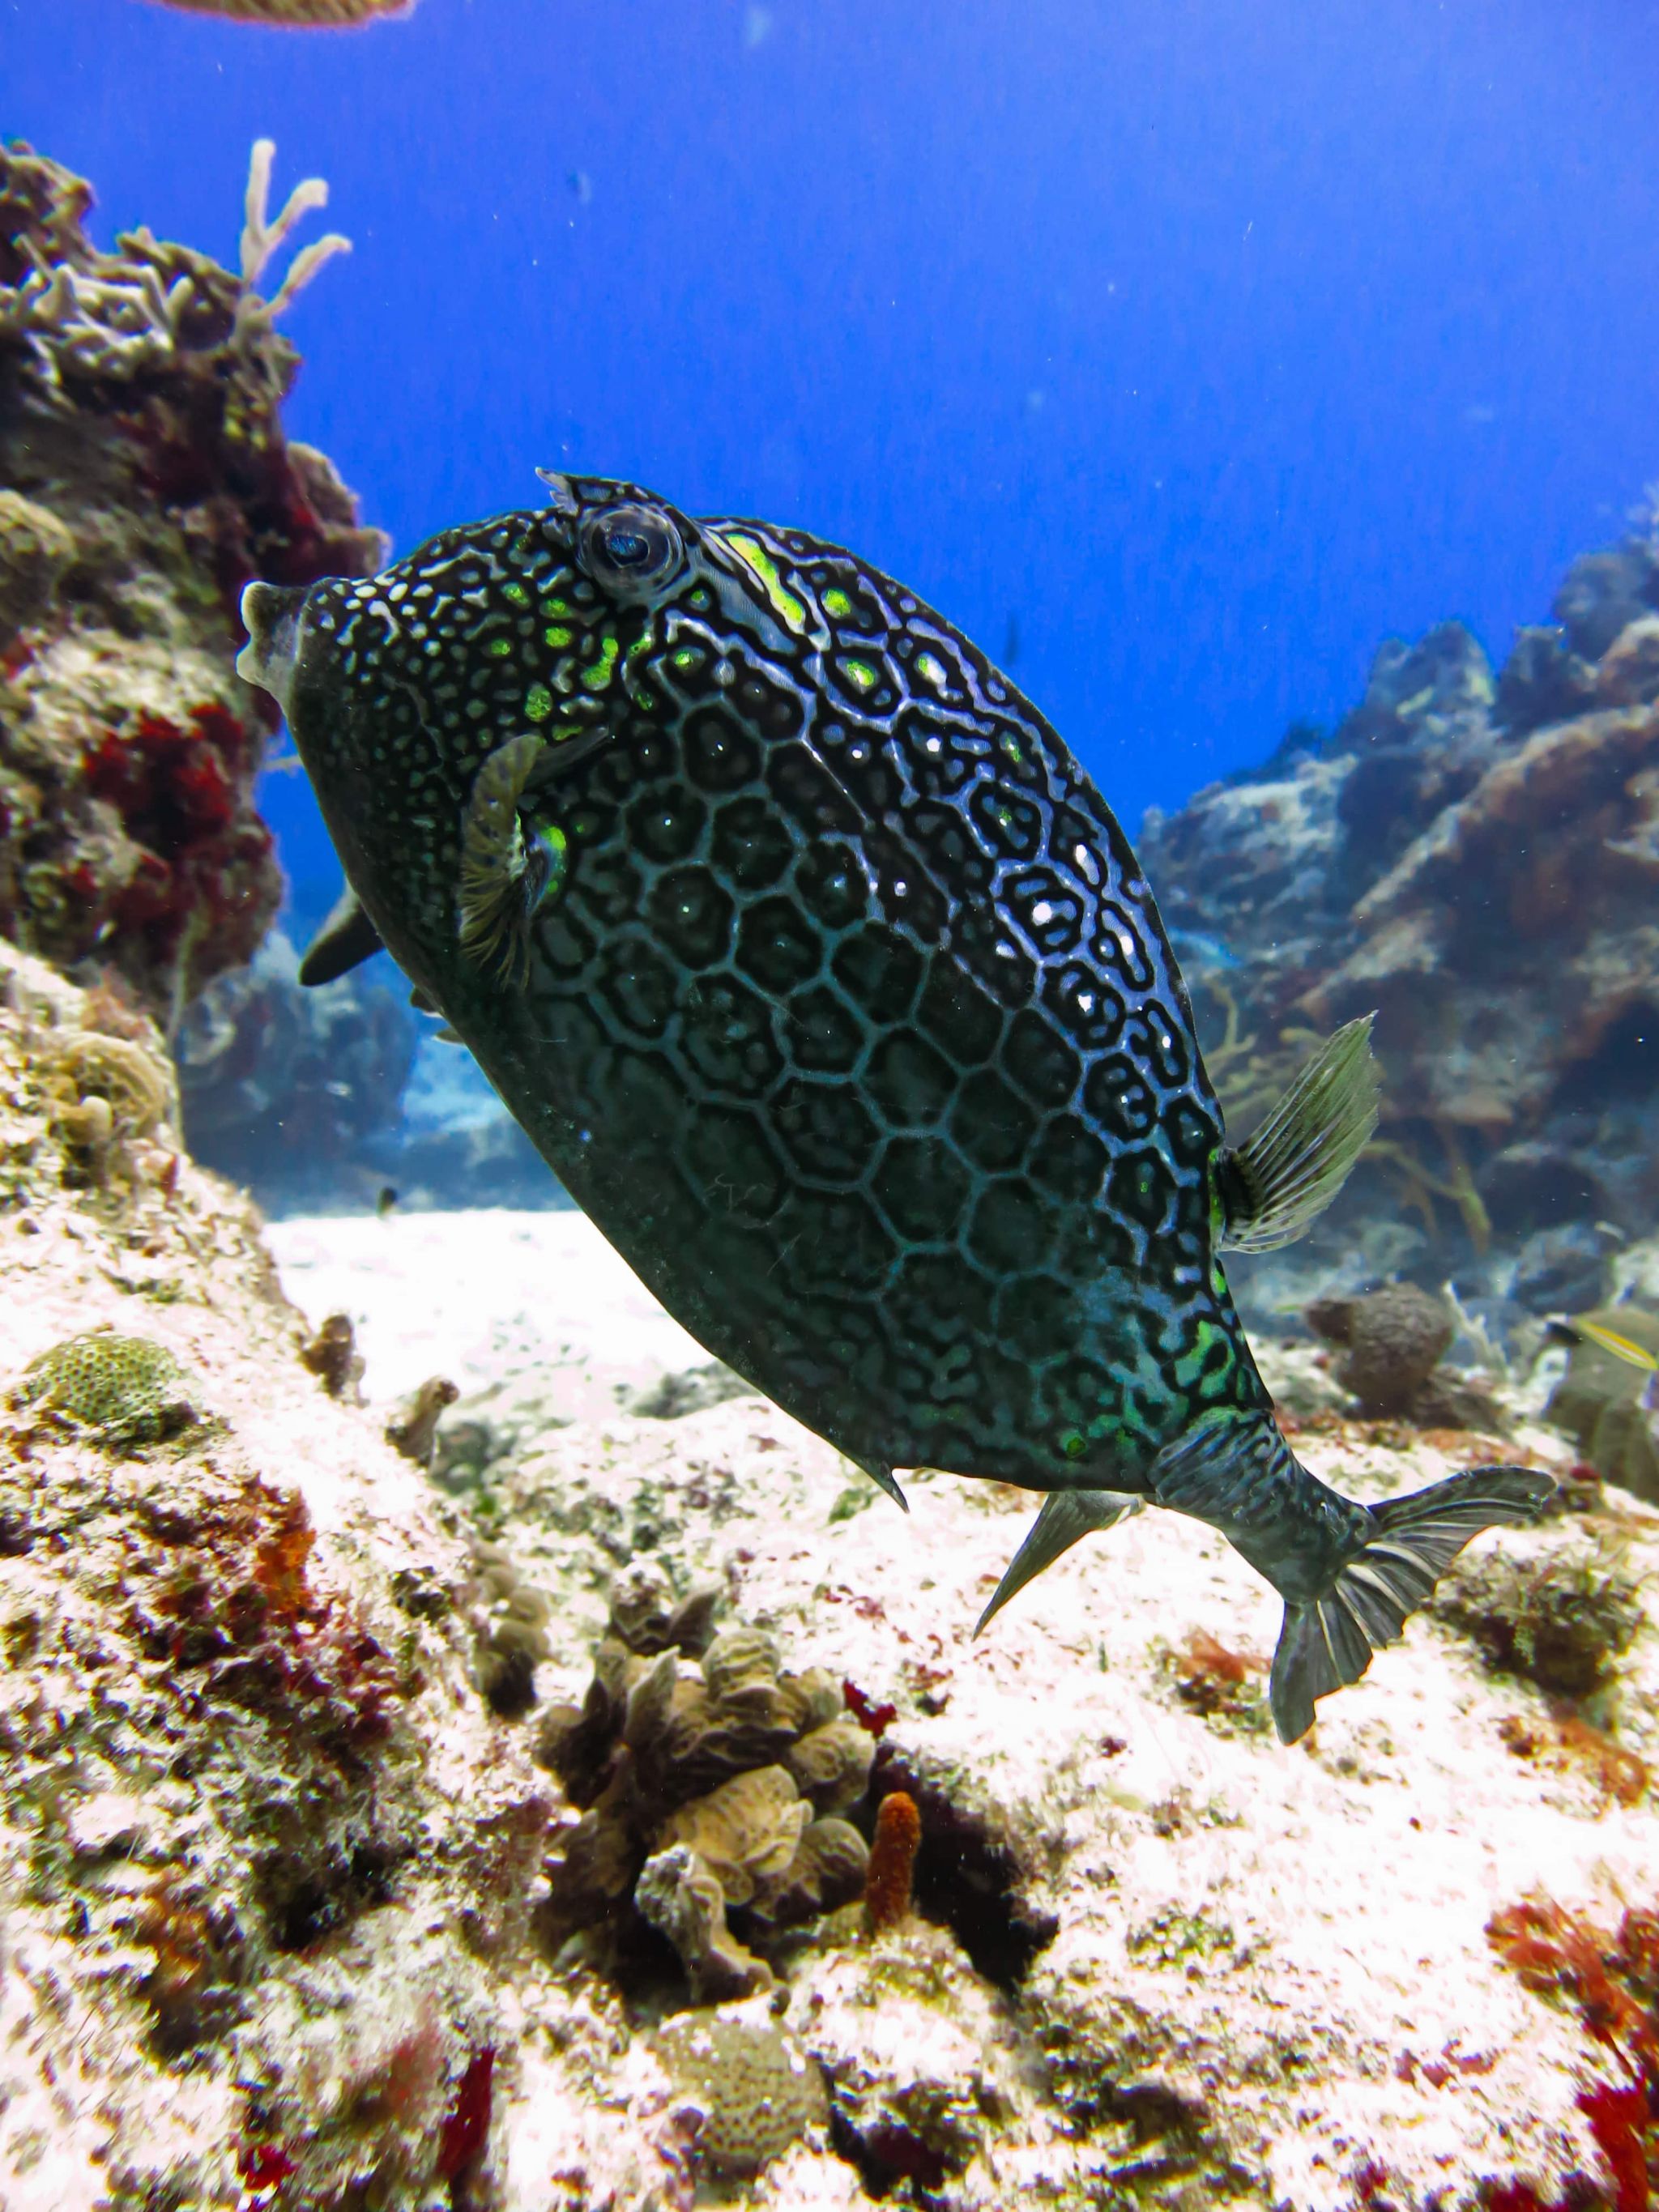 The Ultimate Guide to Diving in Cozumel | Cozumel dive sites, companies & accommodation